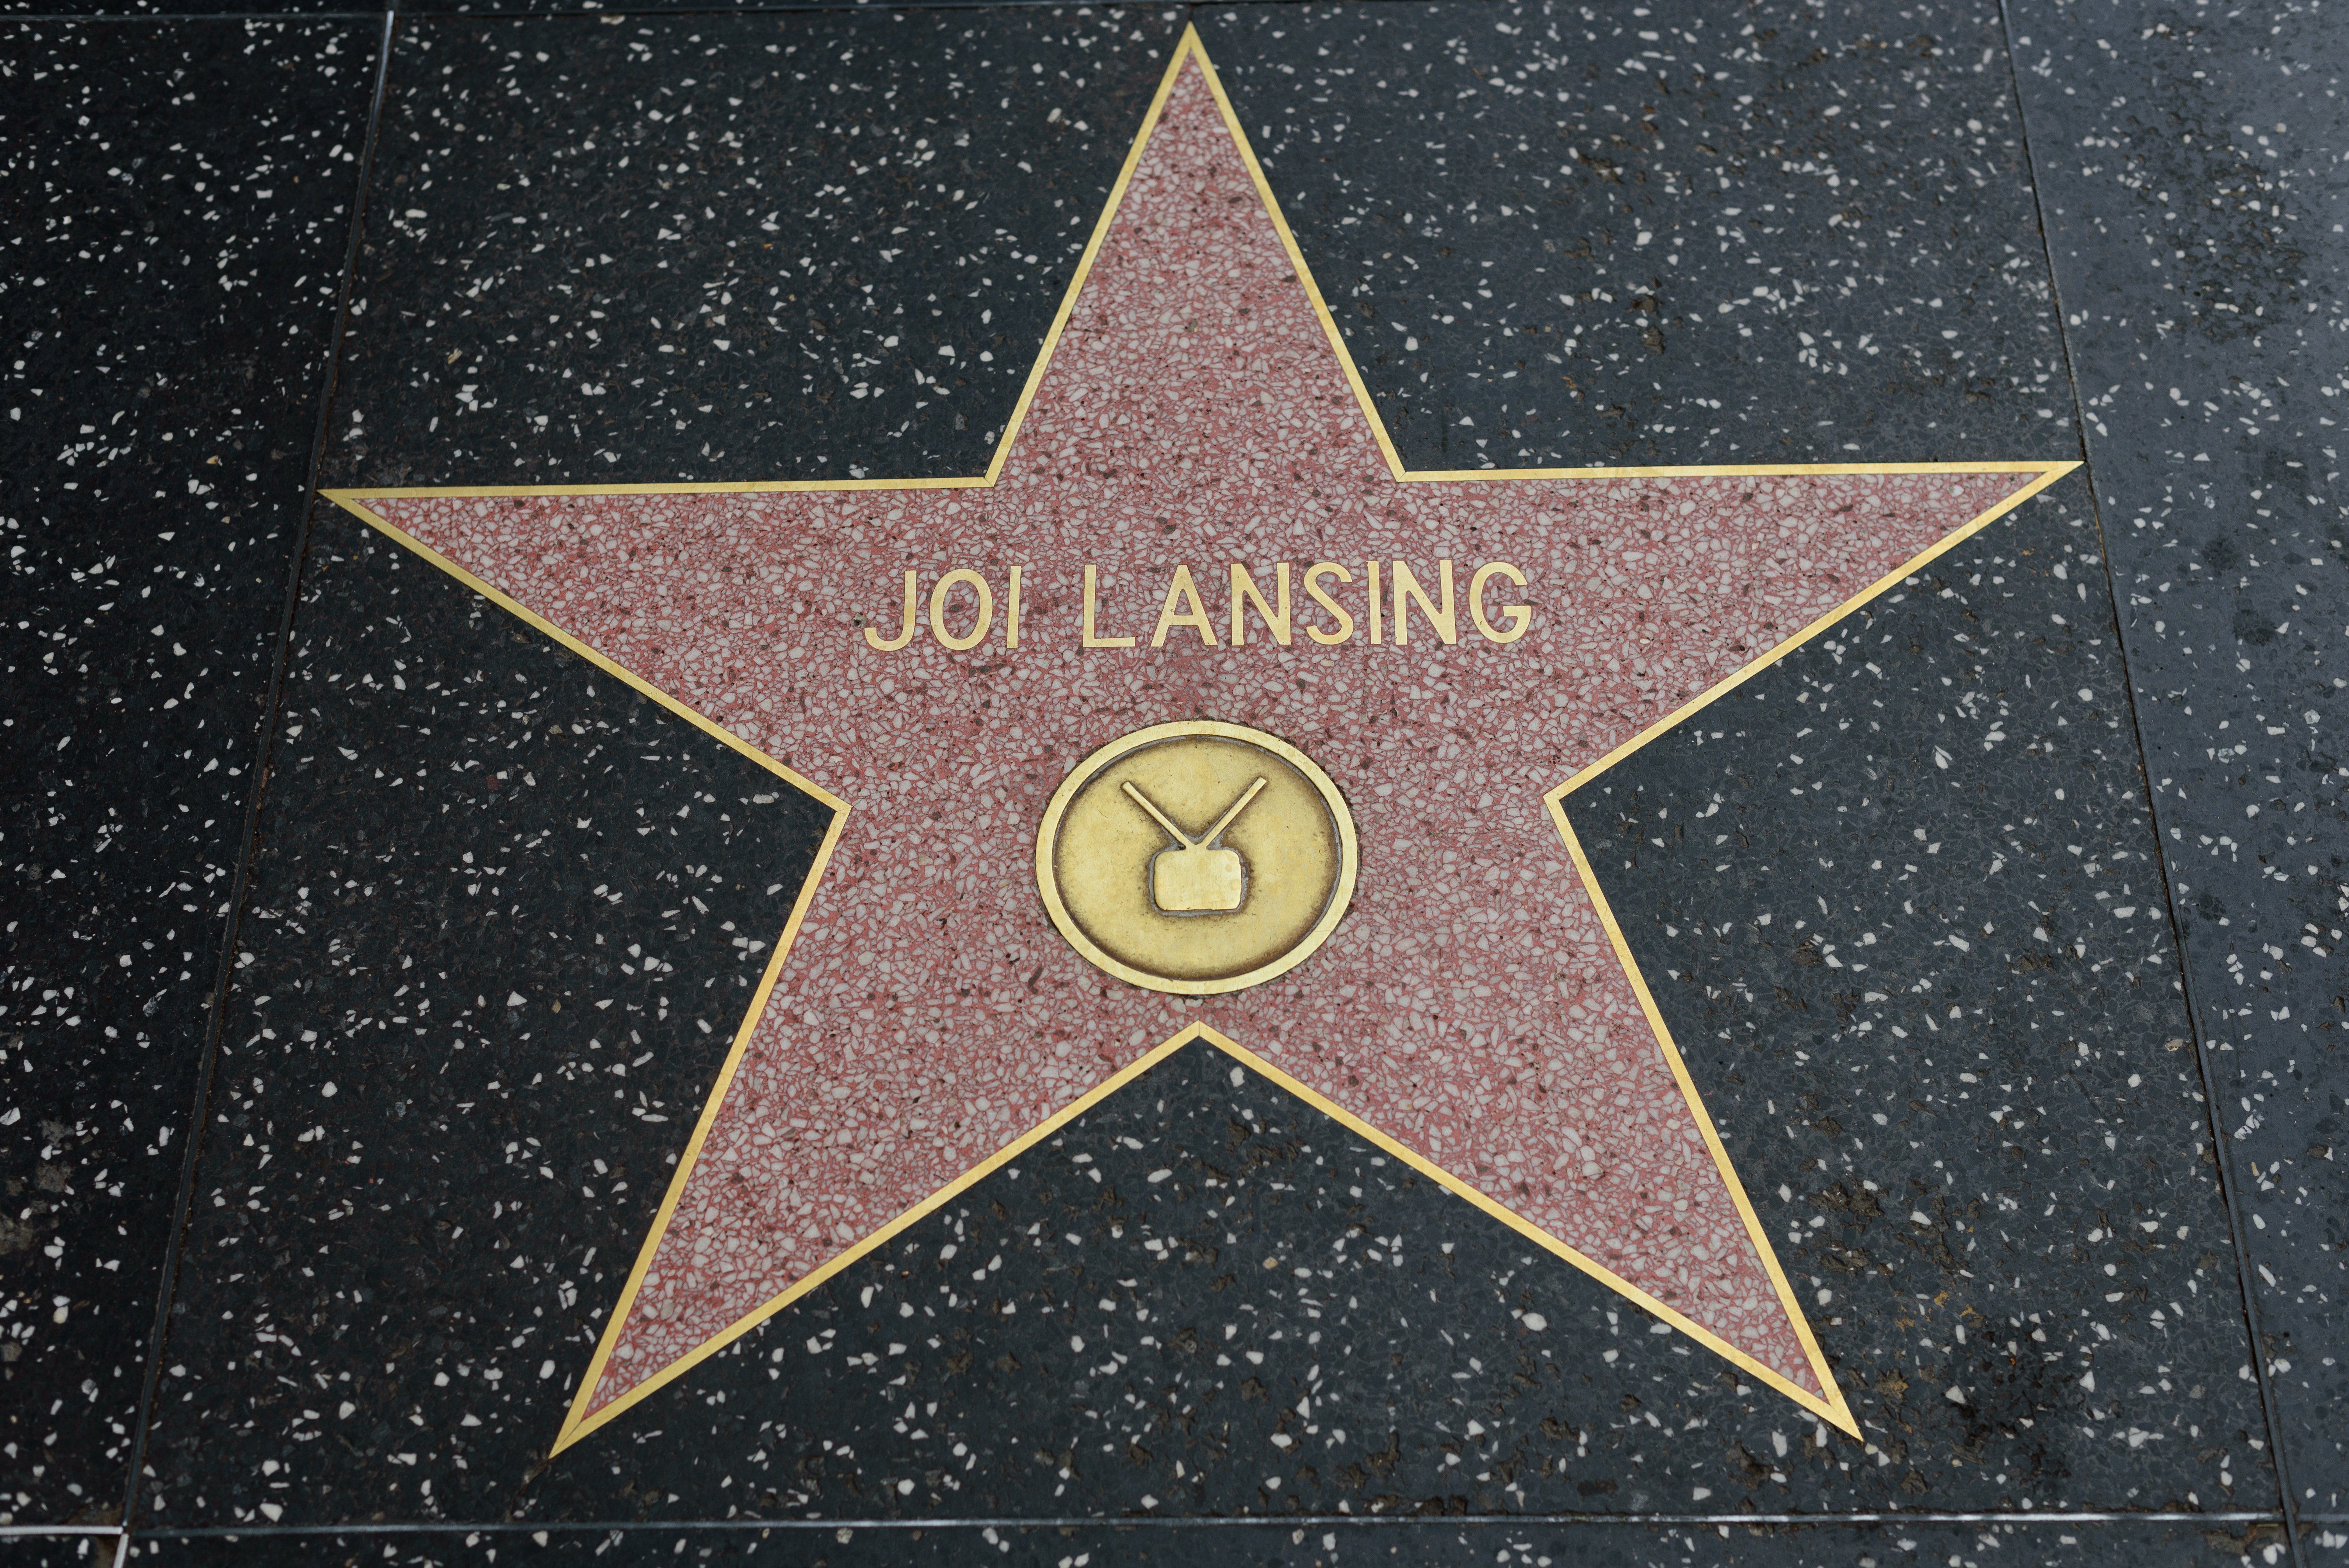 Joi Lansing's star on The Hollywood Walk of Fame. | Photo: Shutterstock